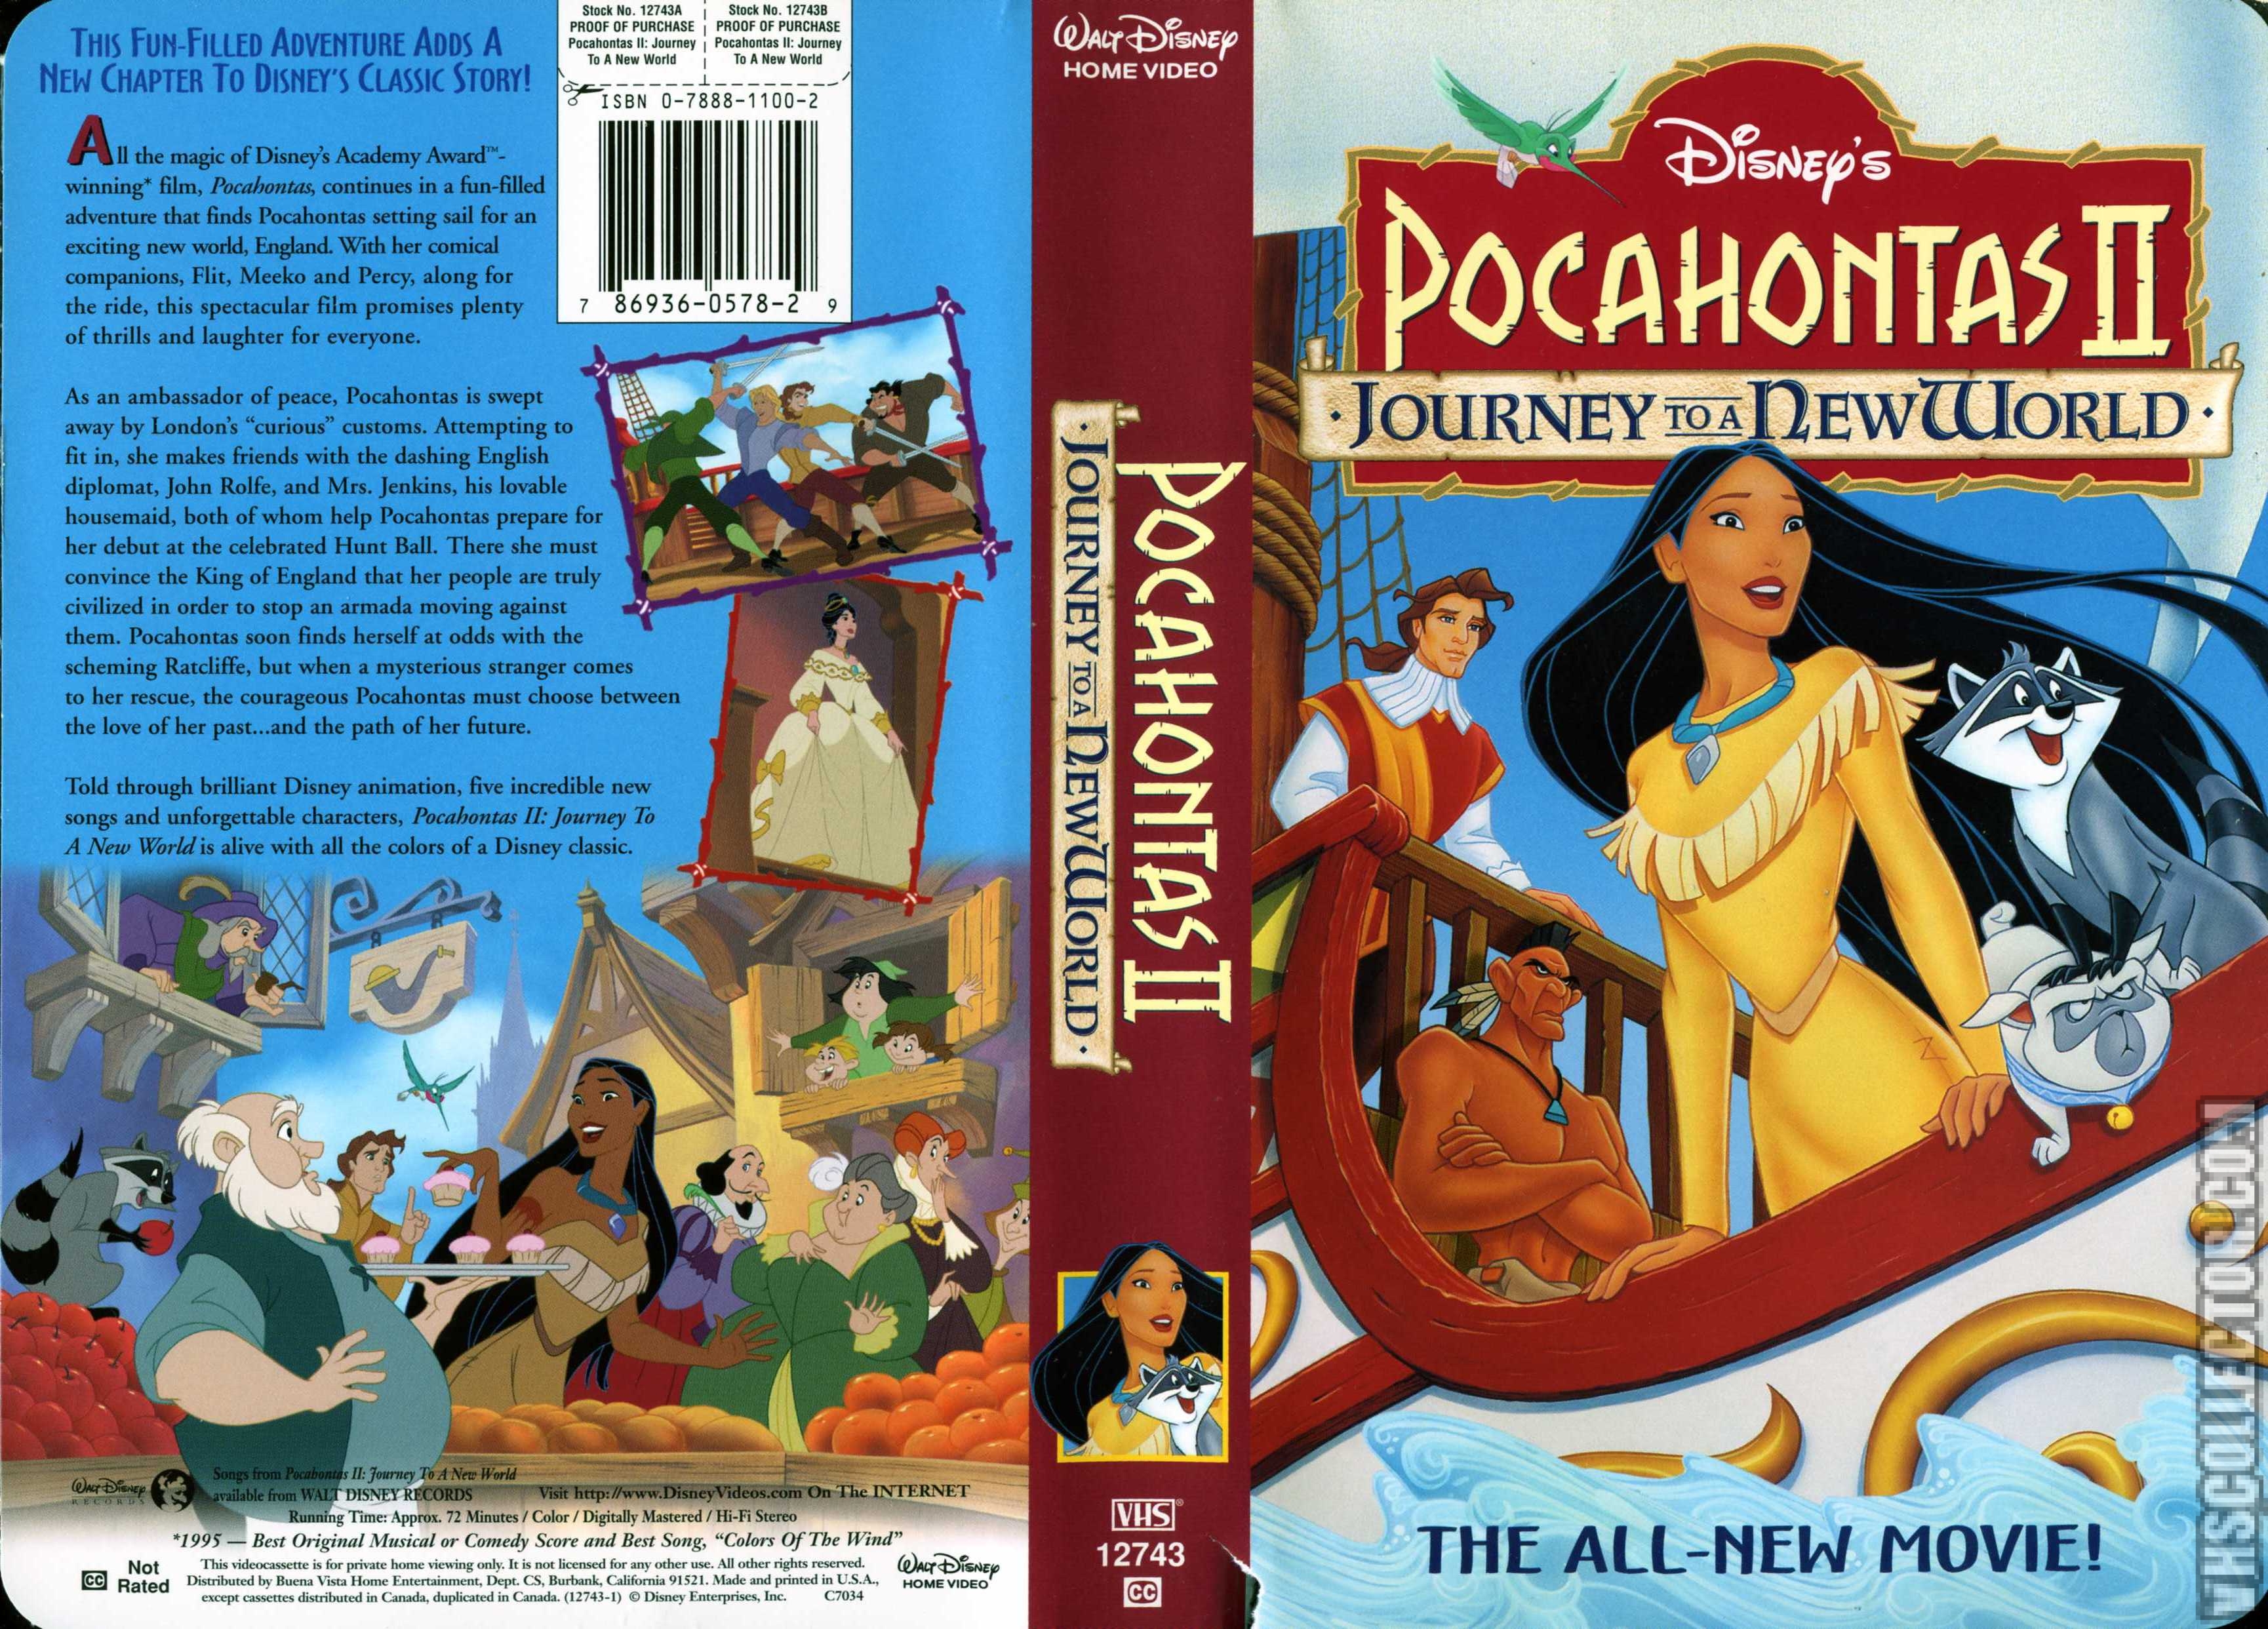 Pocahontas II: Journey to a New World | VHSCollector.com